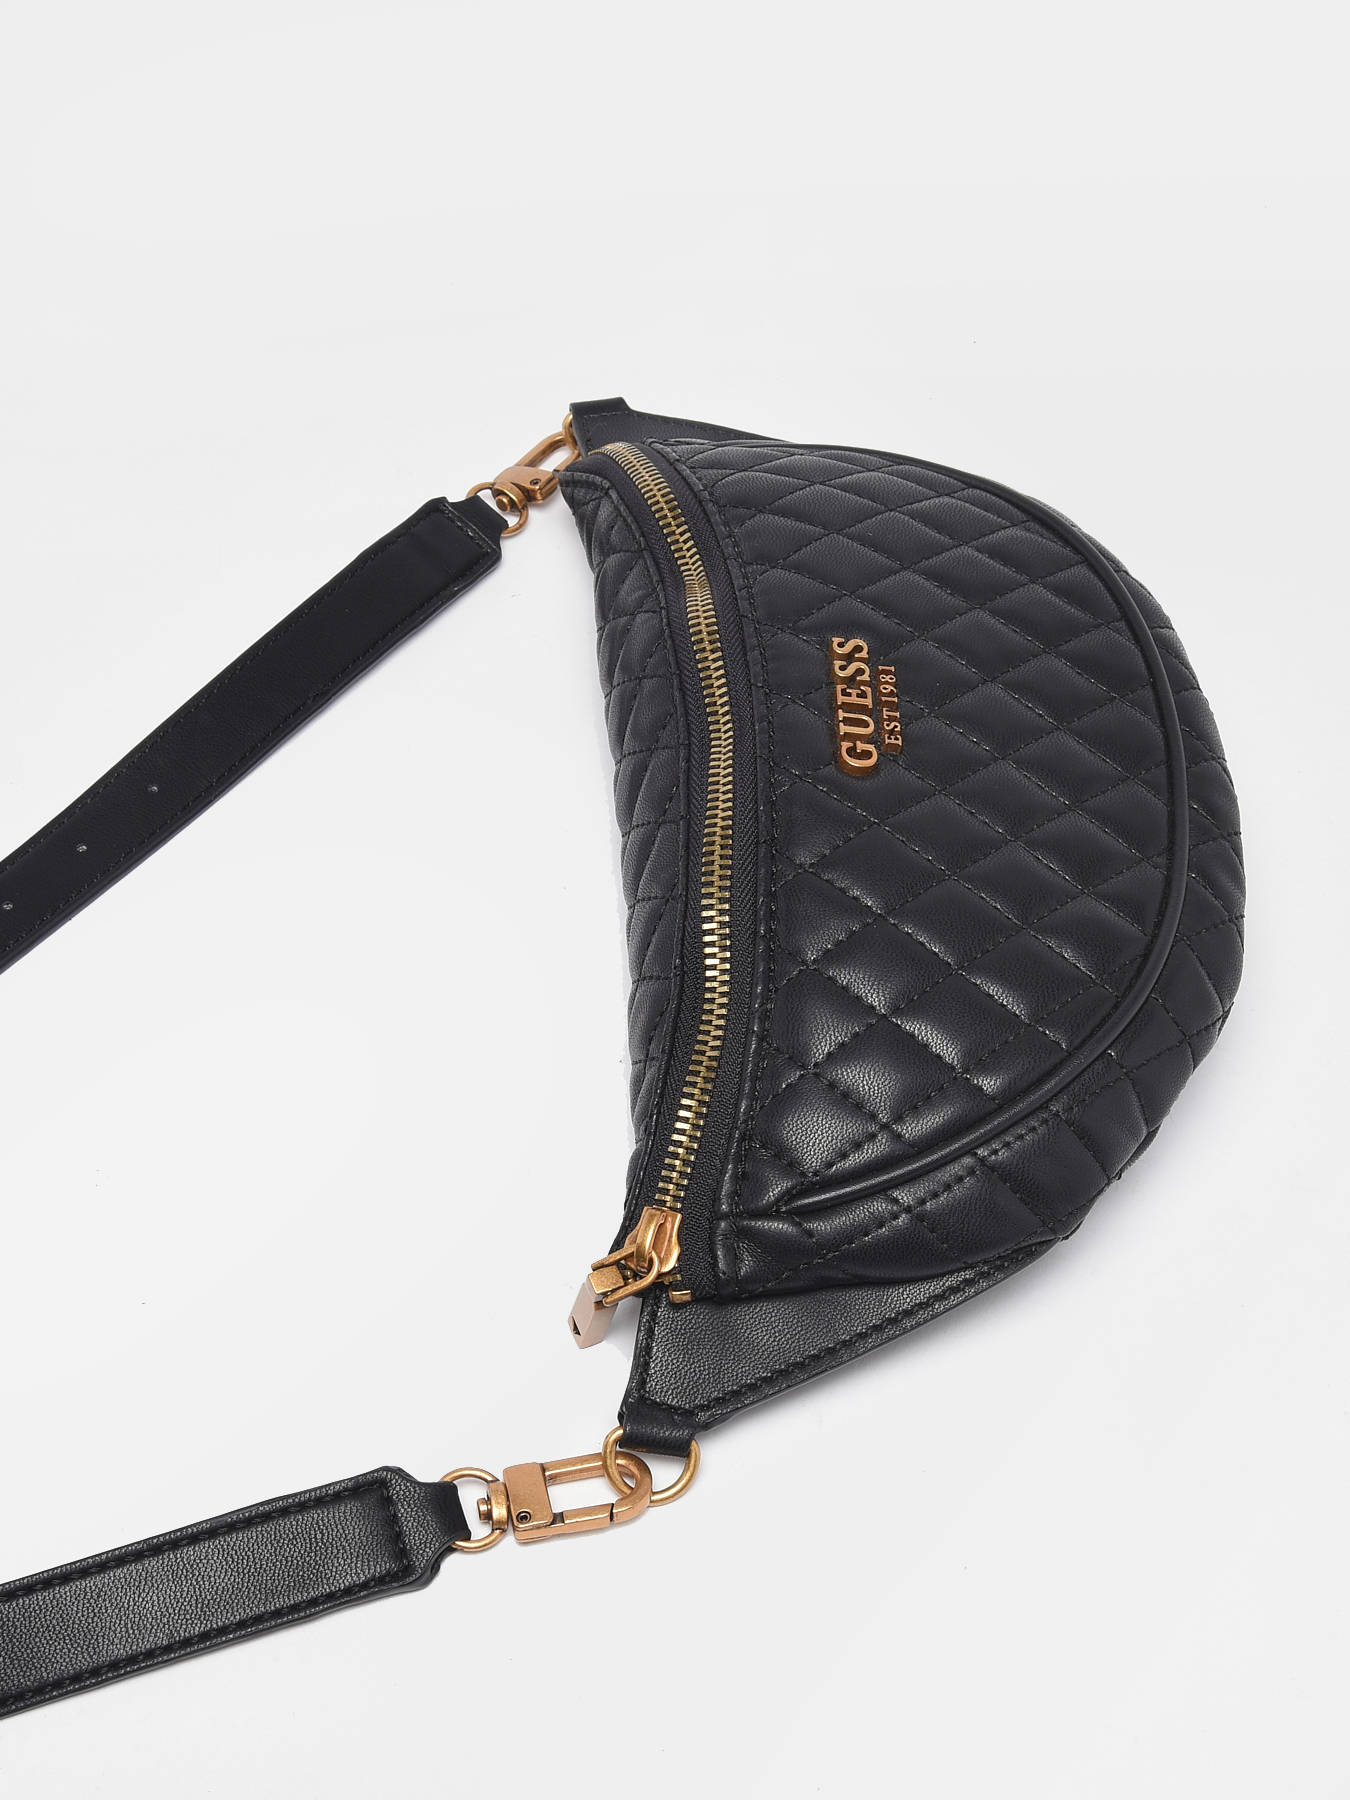 Guess Bum bag - best prices